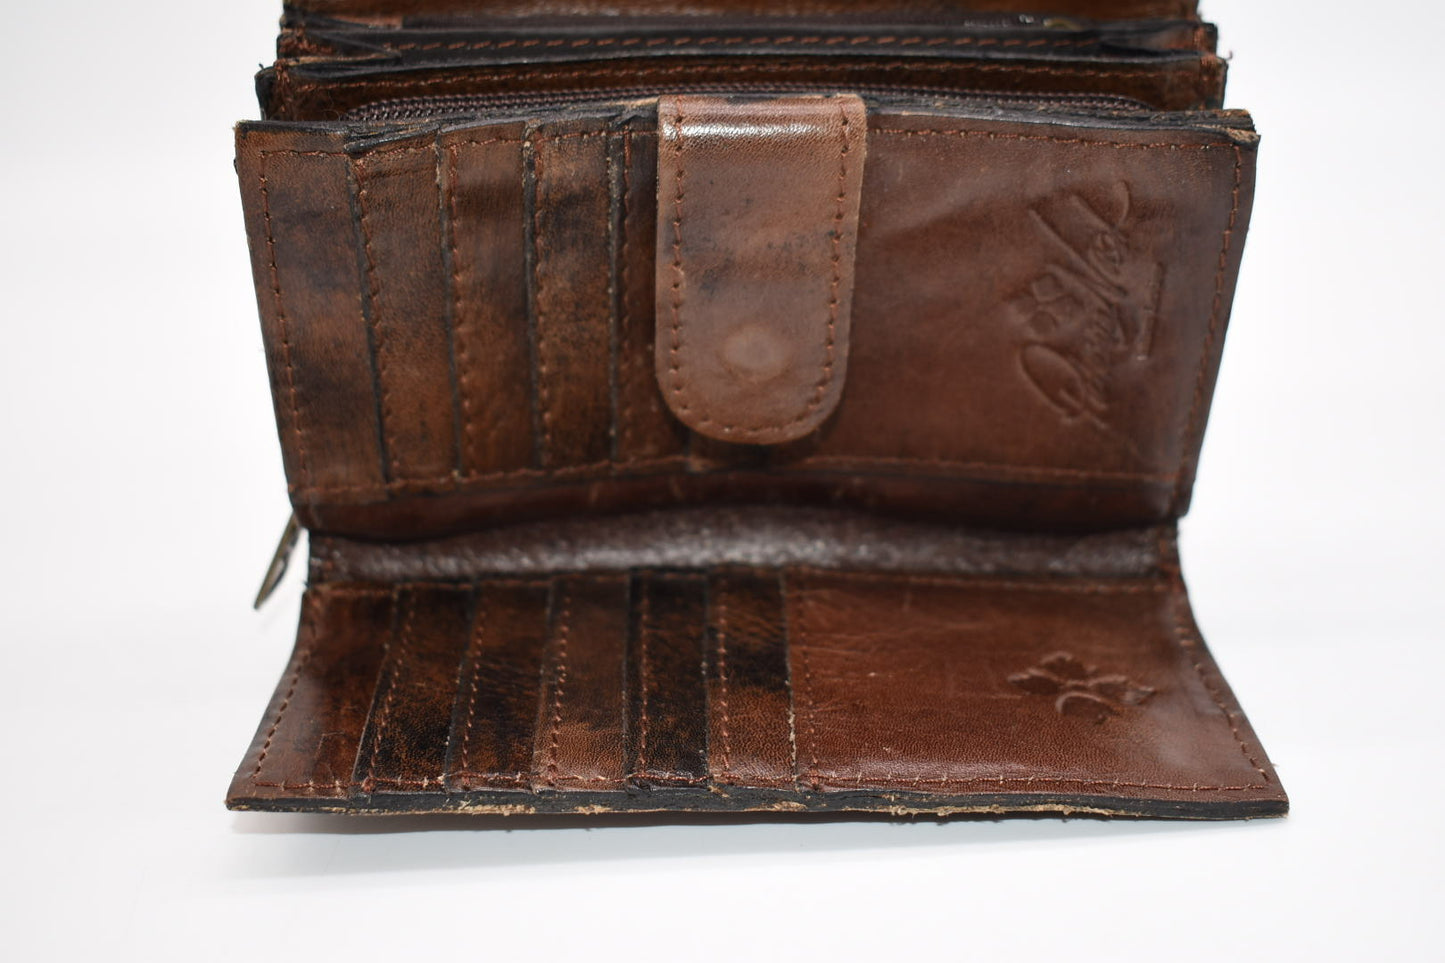 Patricia Nash Tooled Leather Cametti Wallet